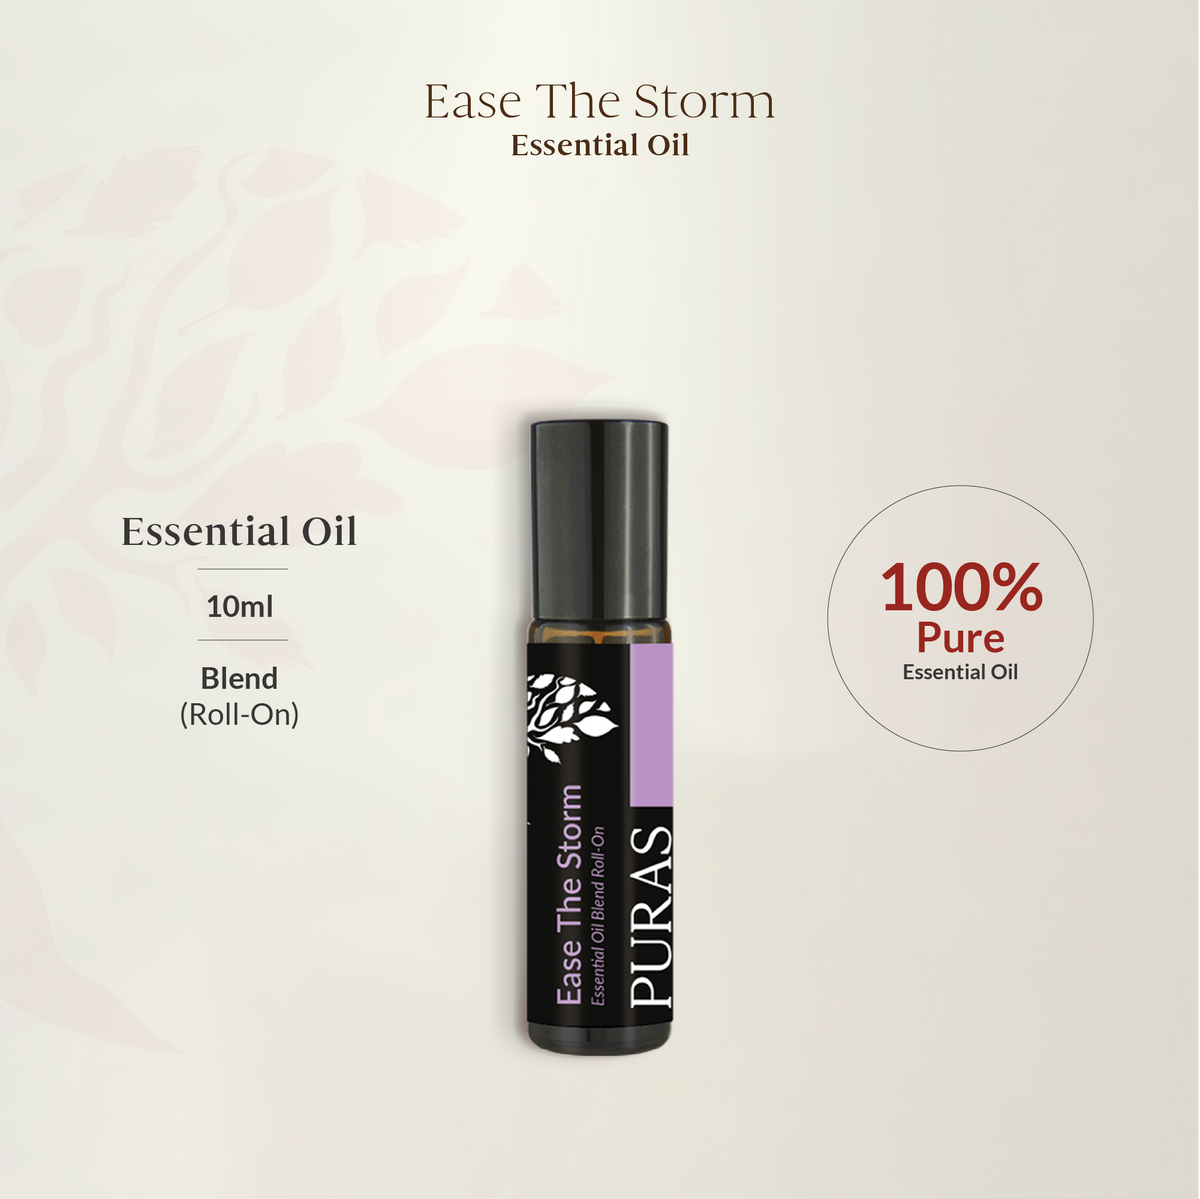 Ease The Storm Essential Oil (Roll-On)